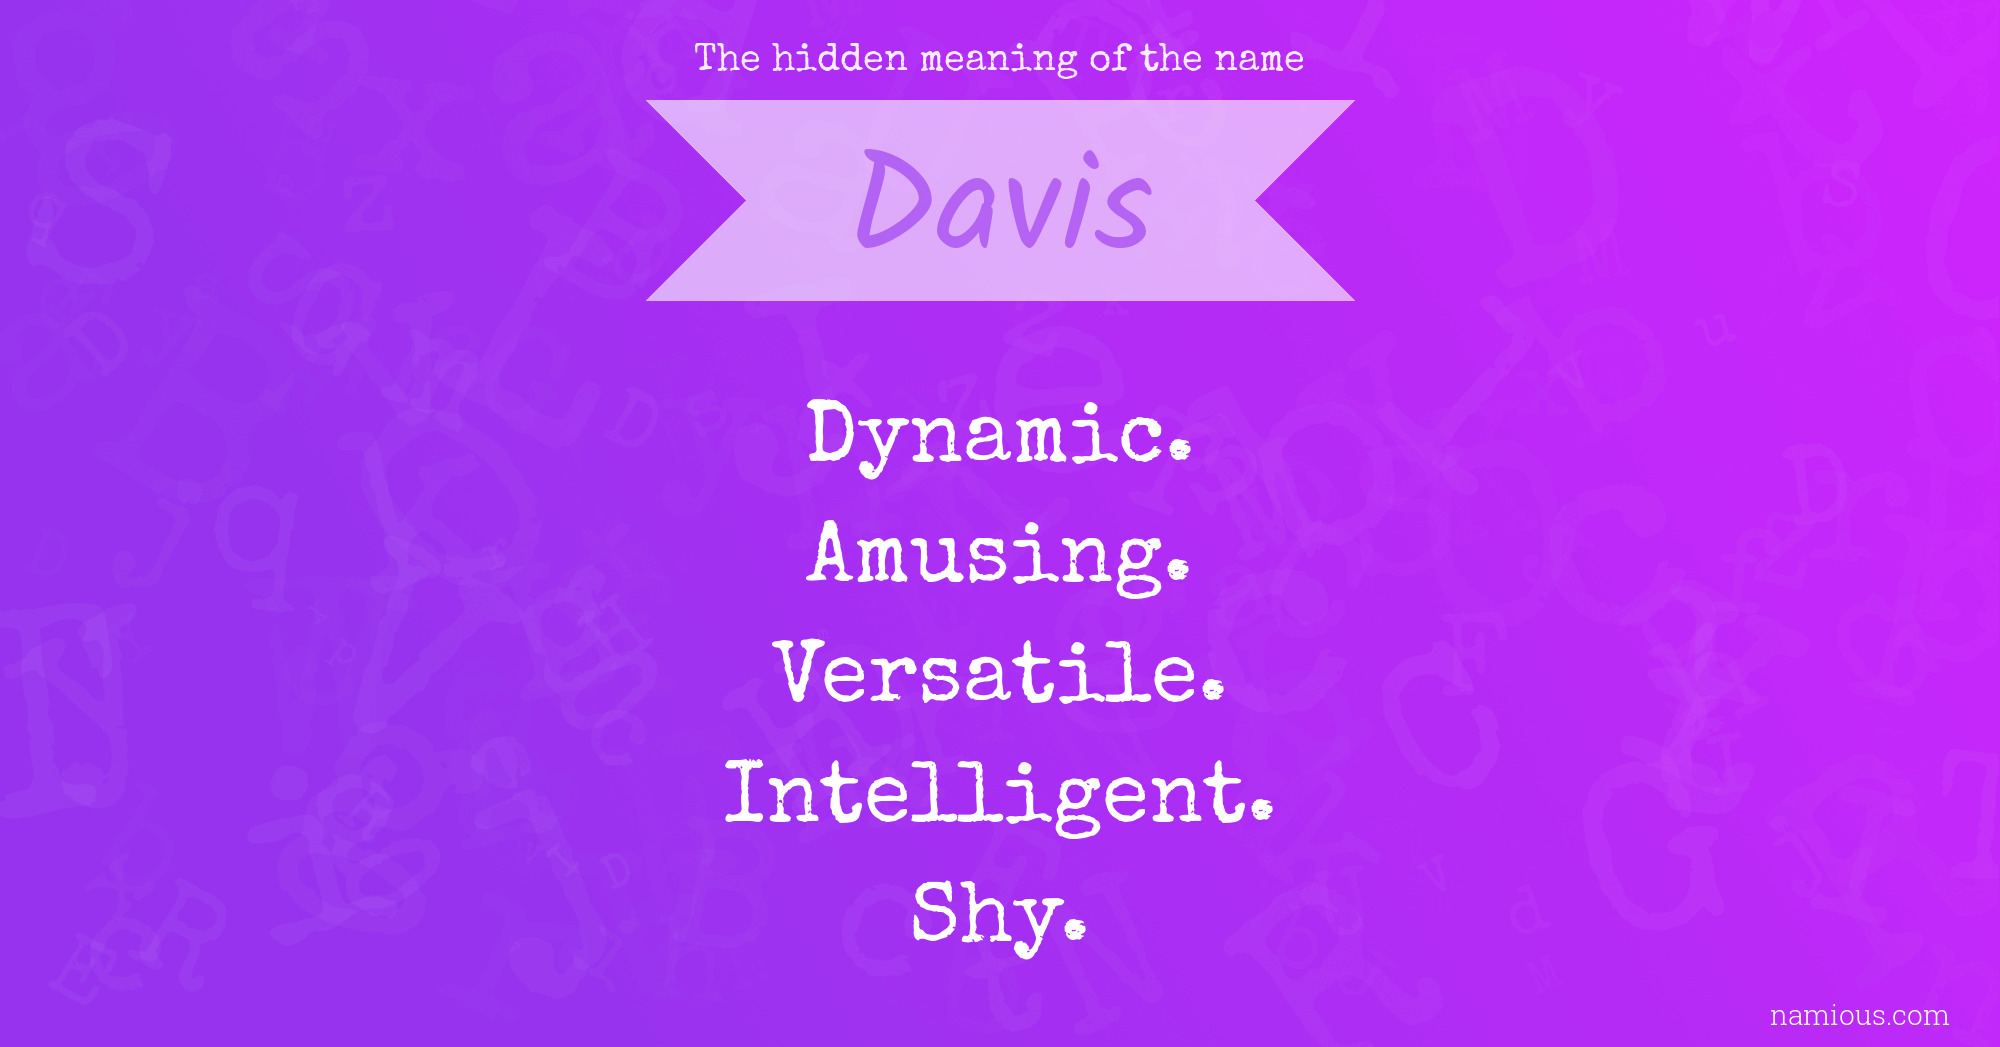 The hidden meaning of the name Davis